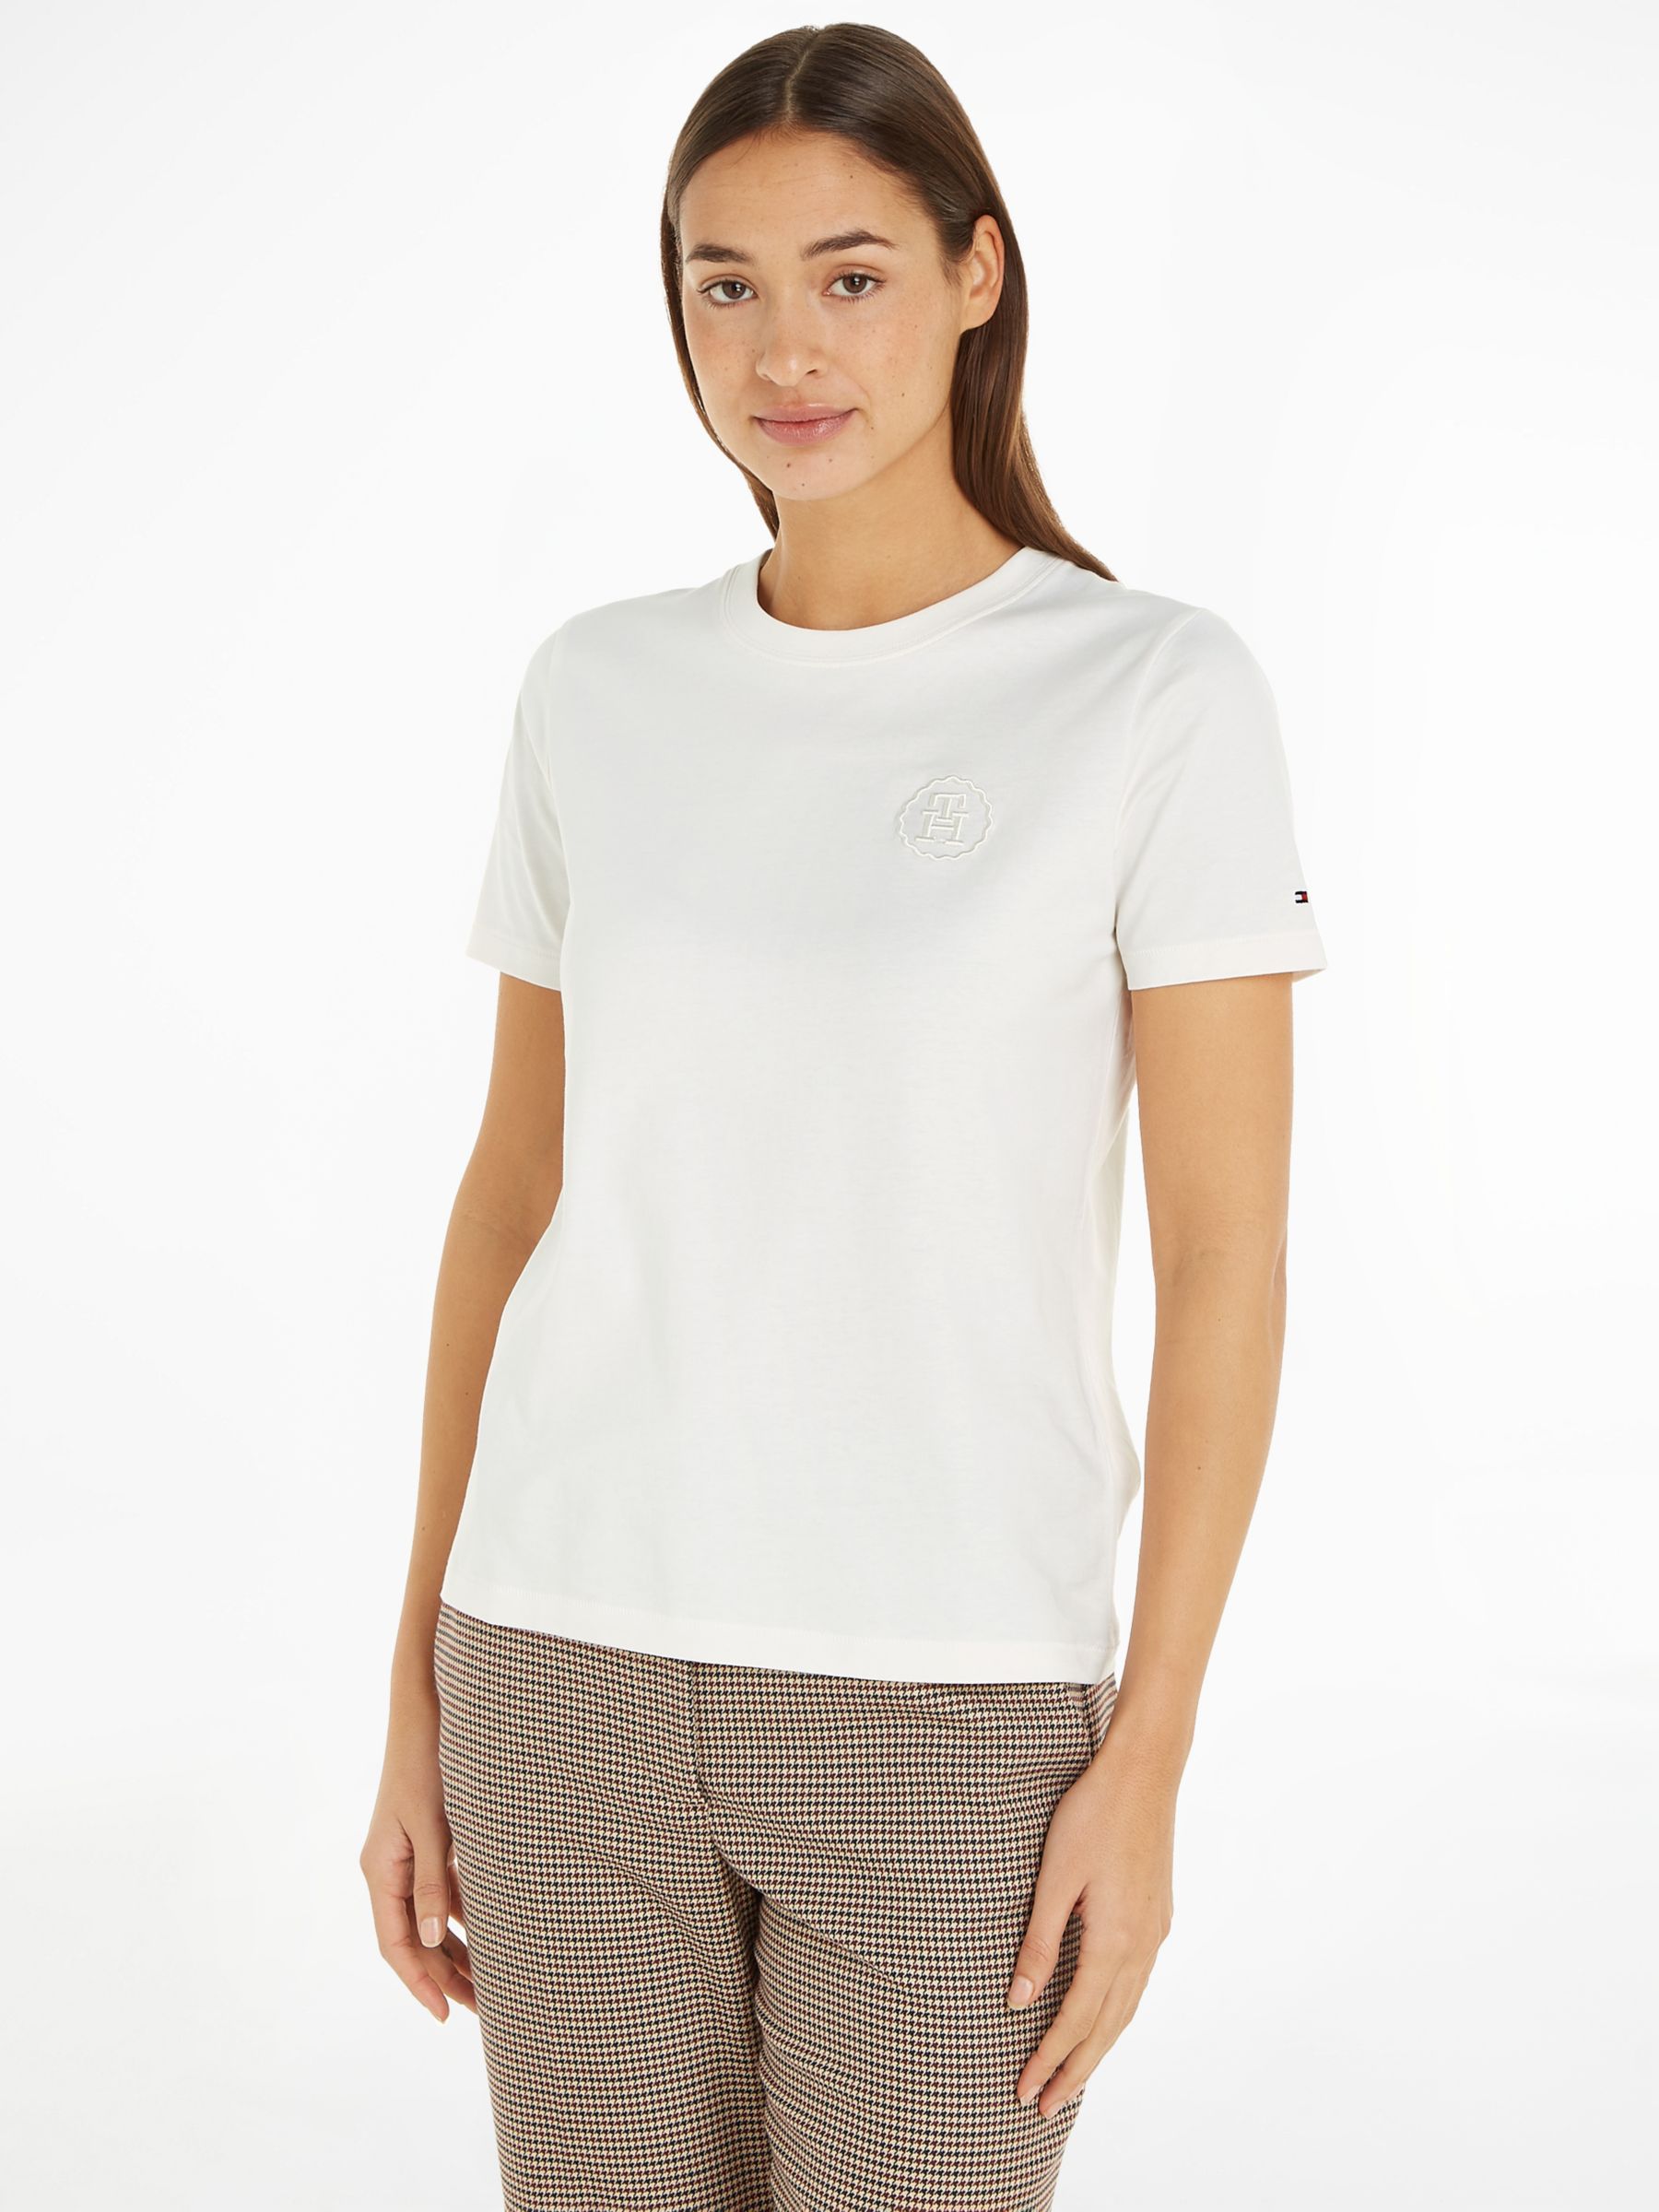 Tommy Hilfiger womens T-shirt, white - Buy online! HERE